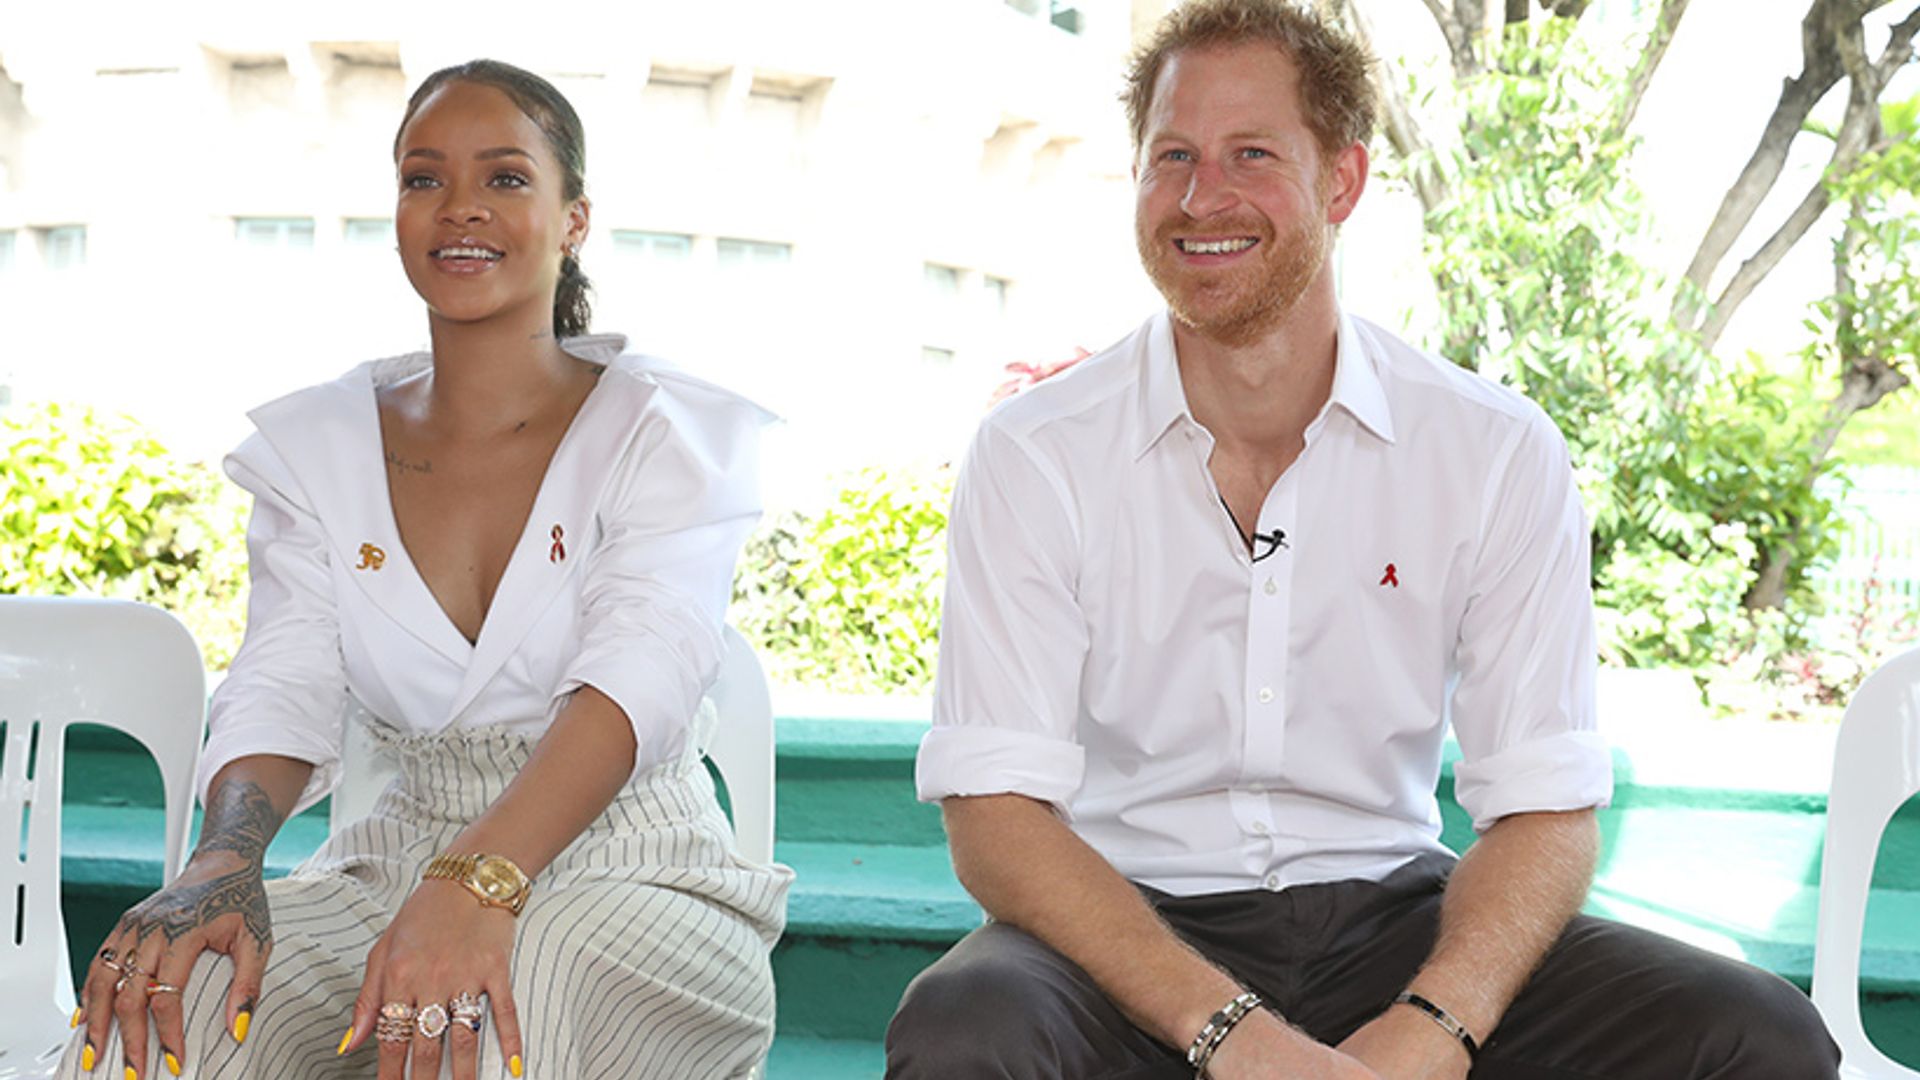 Rihanna had the sassiest response when asked if she's attending Prince Harry's wedding